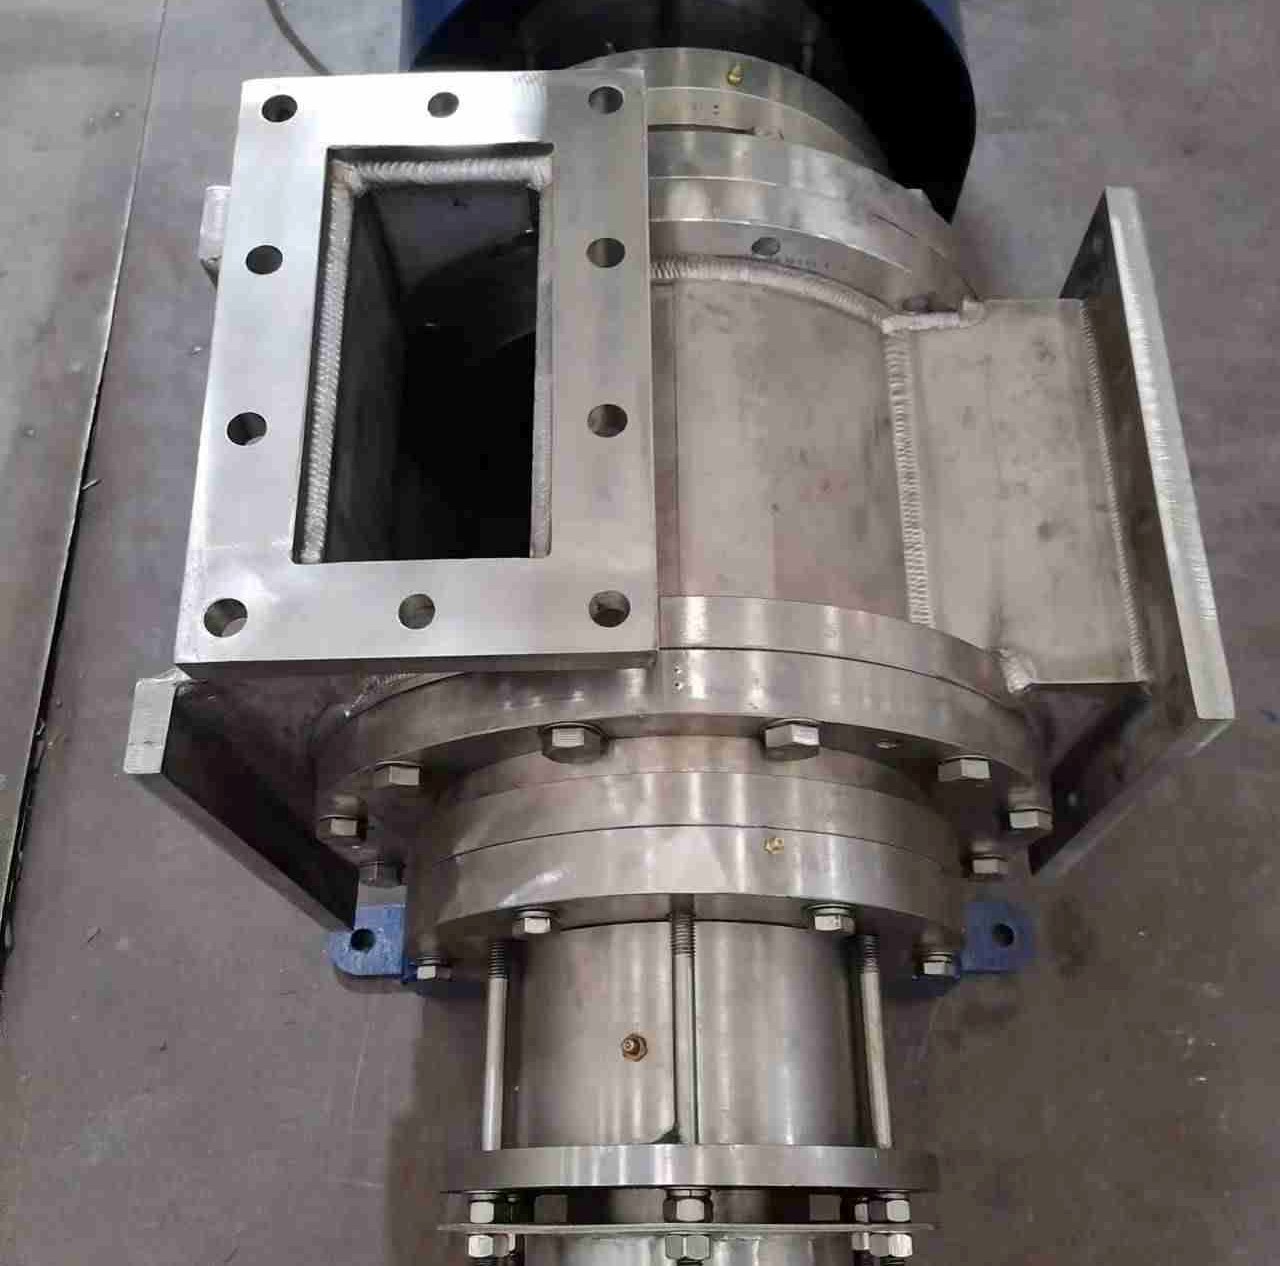 Stainless steel lamellar pump for slaughterhouse waste, fish waste and biogas plants